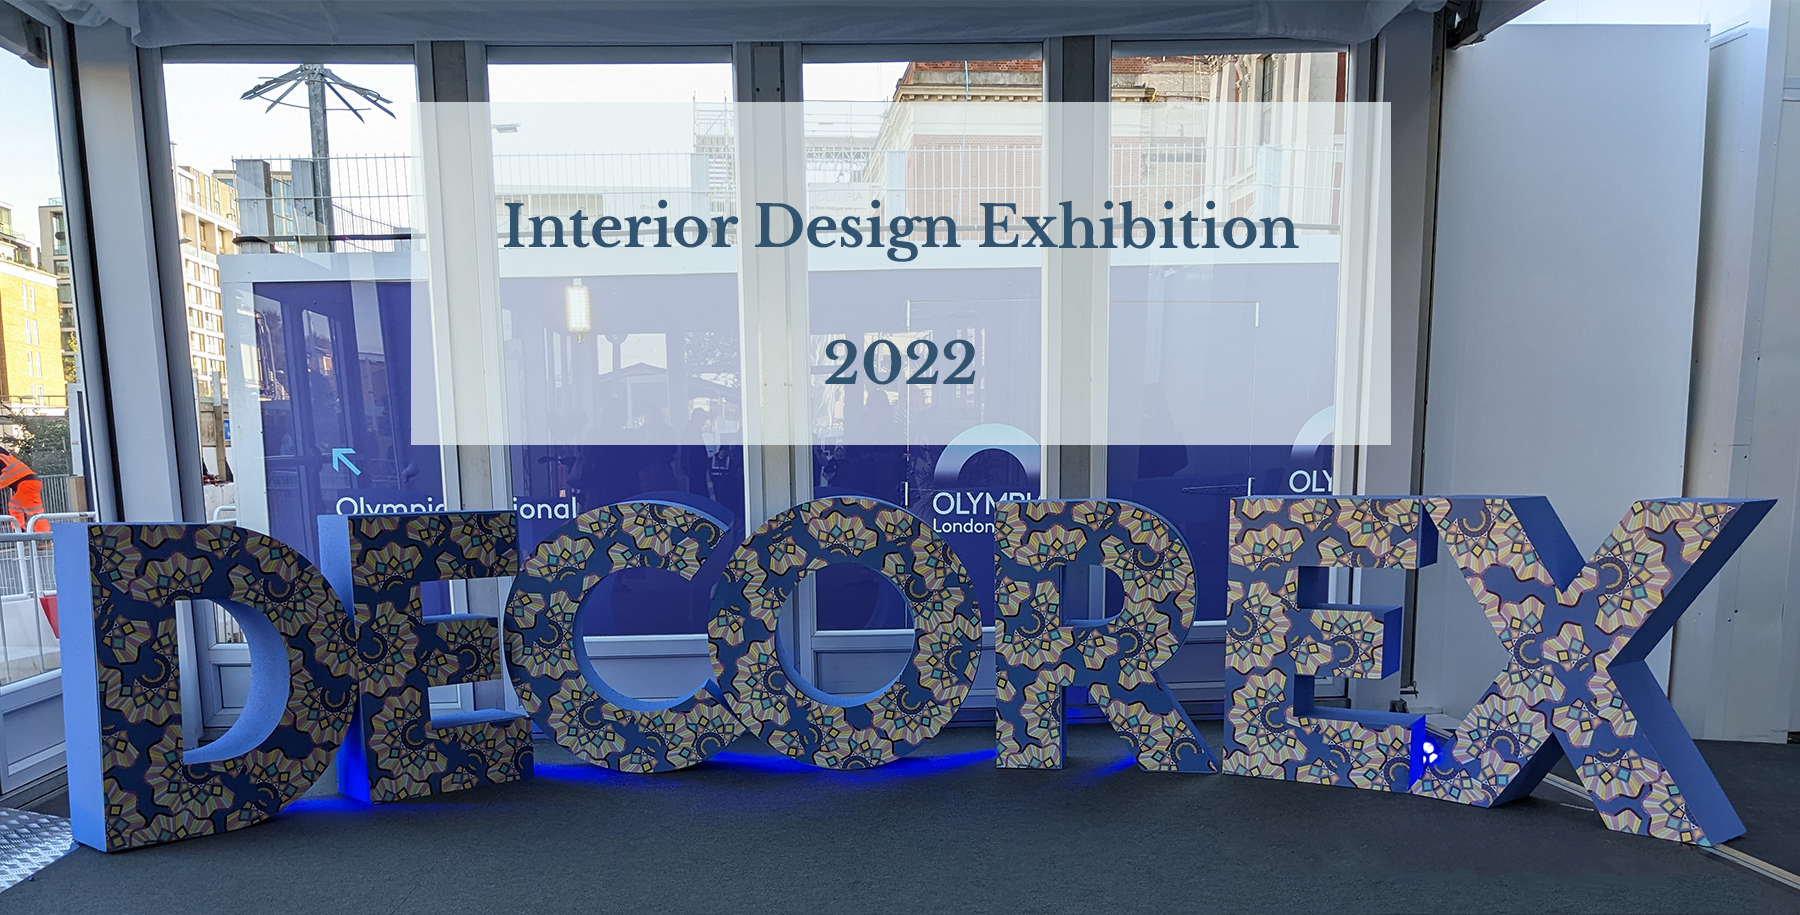 A photo of the Decorex sign at the entrance to the exhibition